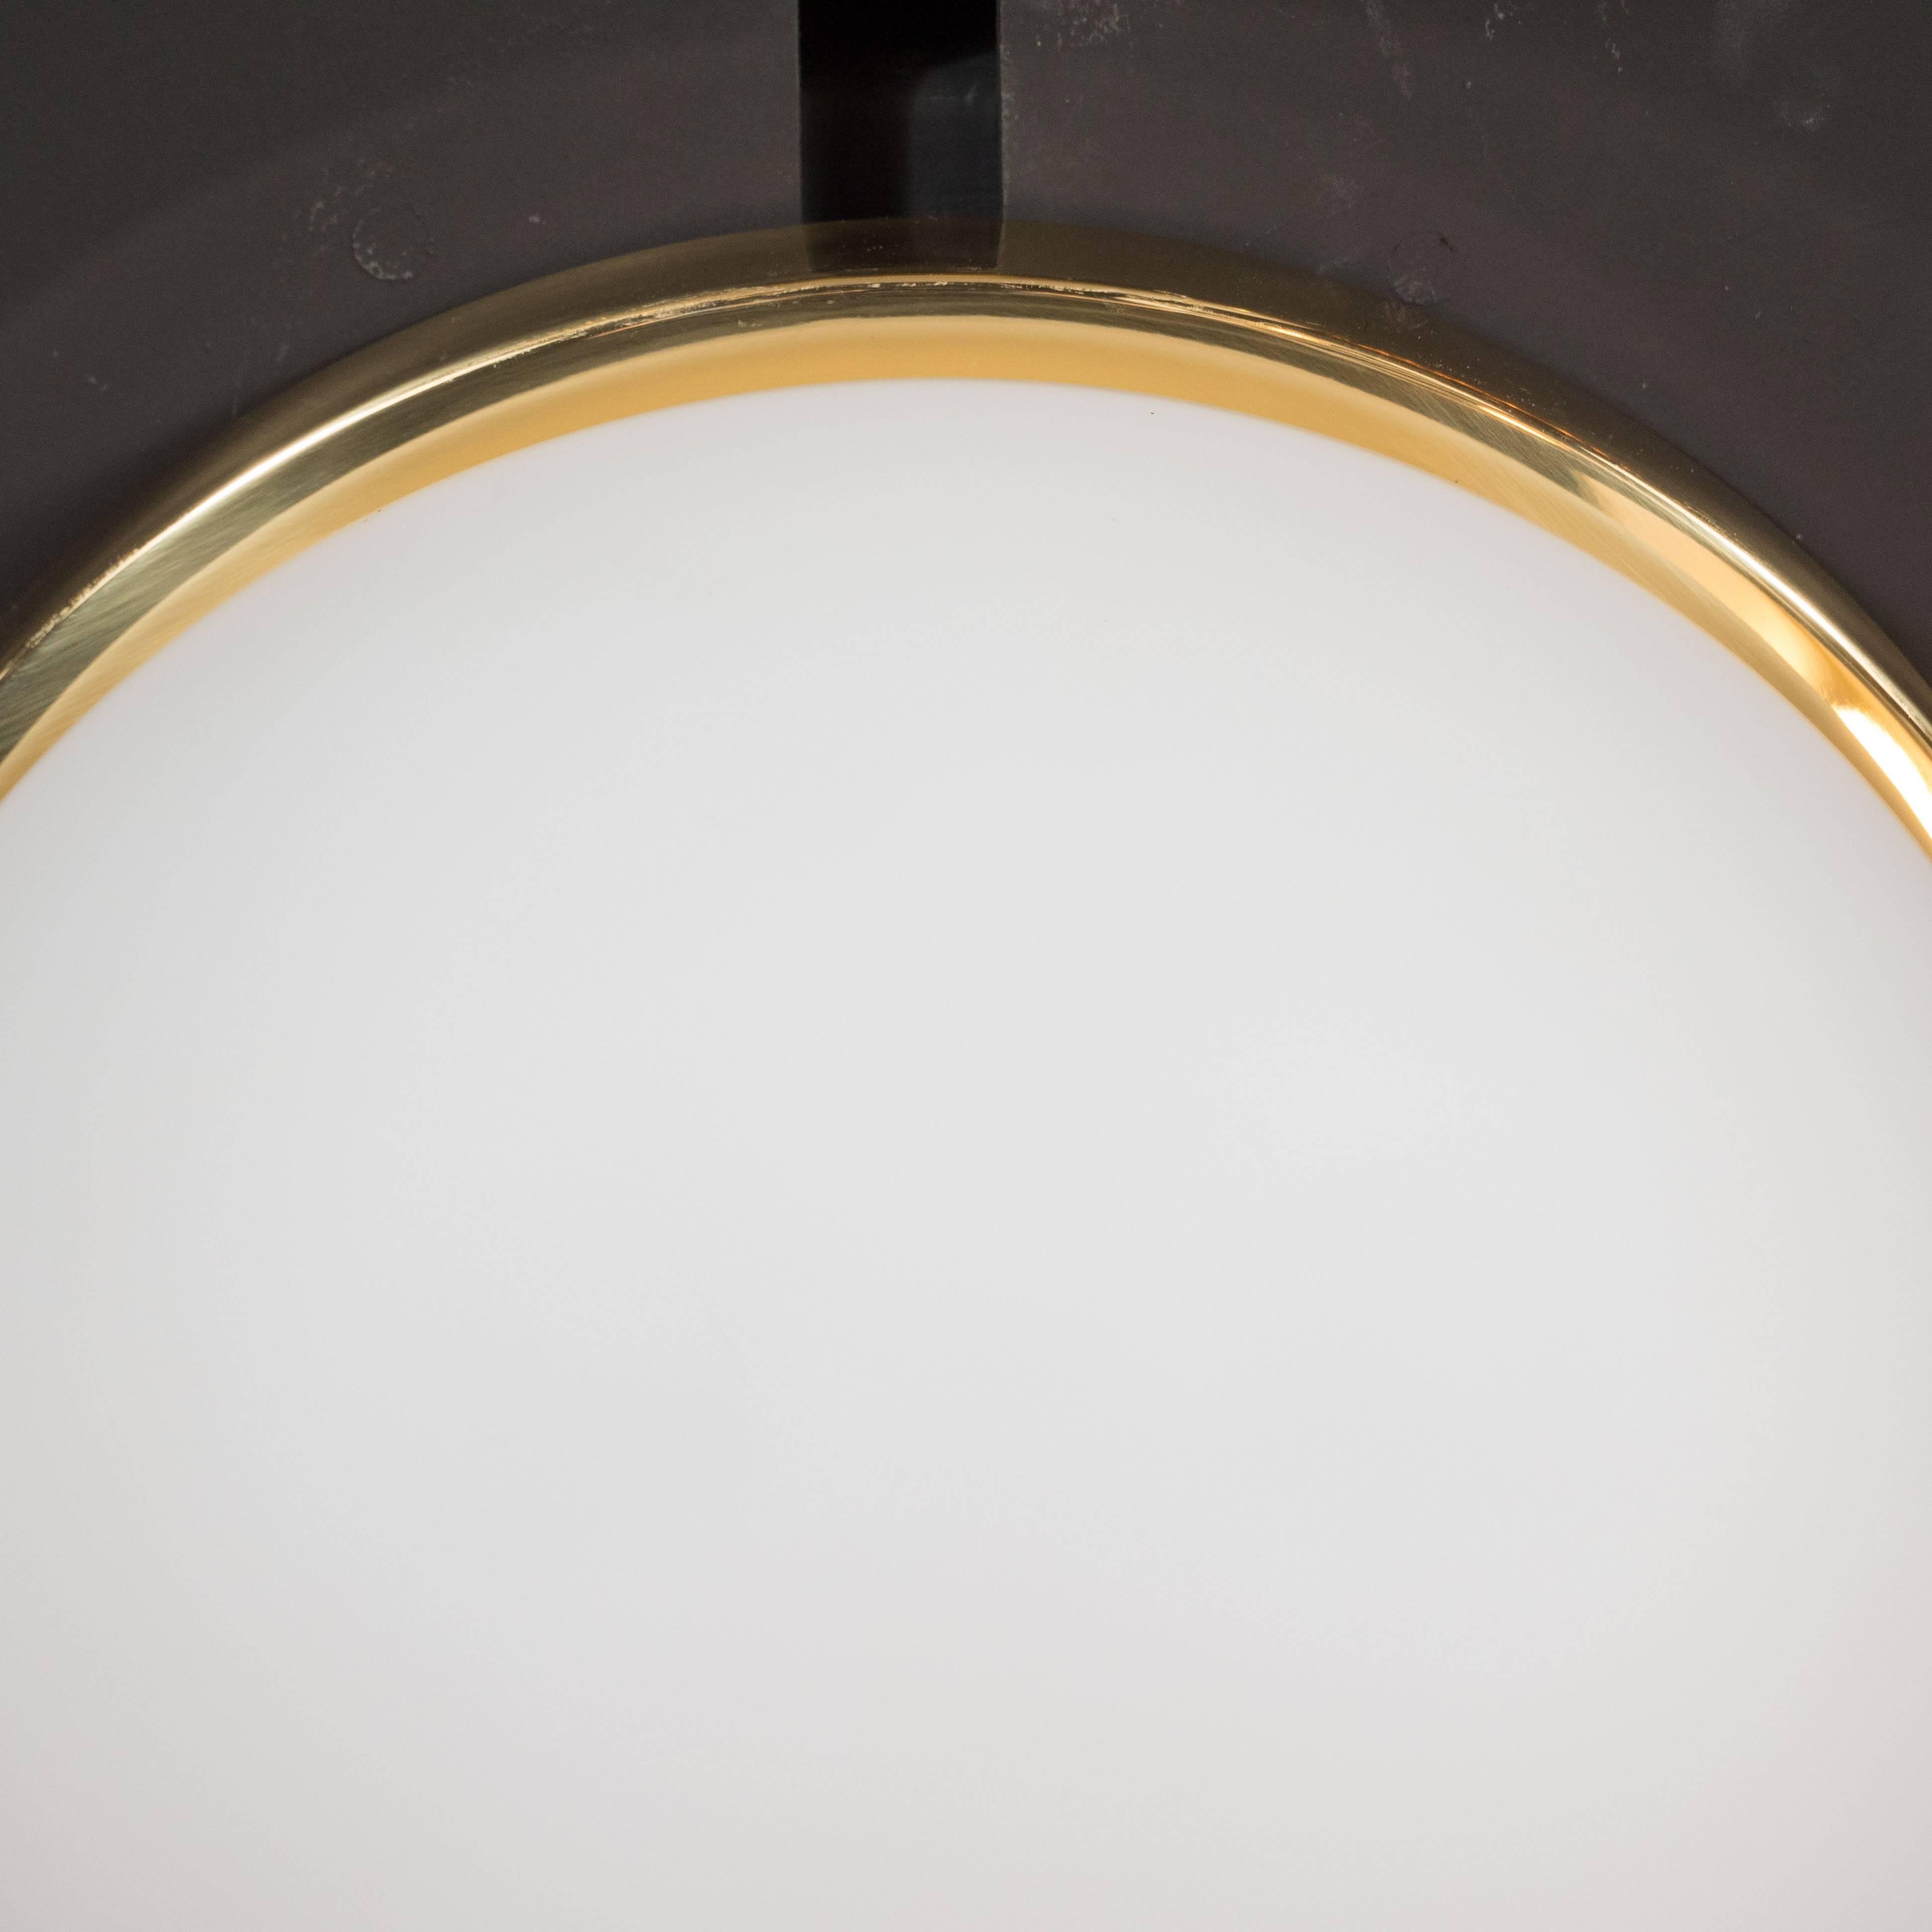 This frosted glass fixture was produced by the esteemed Glashütte Limburg in Germany, circa 1960. It is composed of a domed shape frosted glass with a circular skyscraper style brass base. These fixtures are chic, elegant and timeless, blending